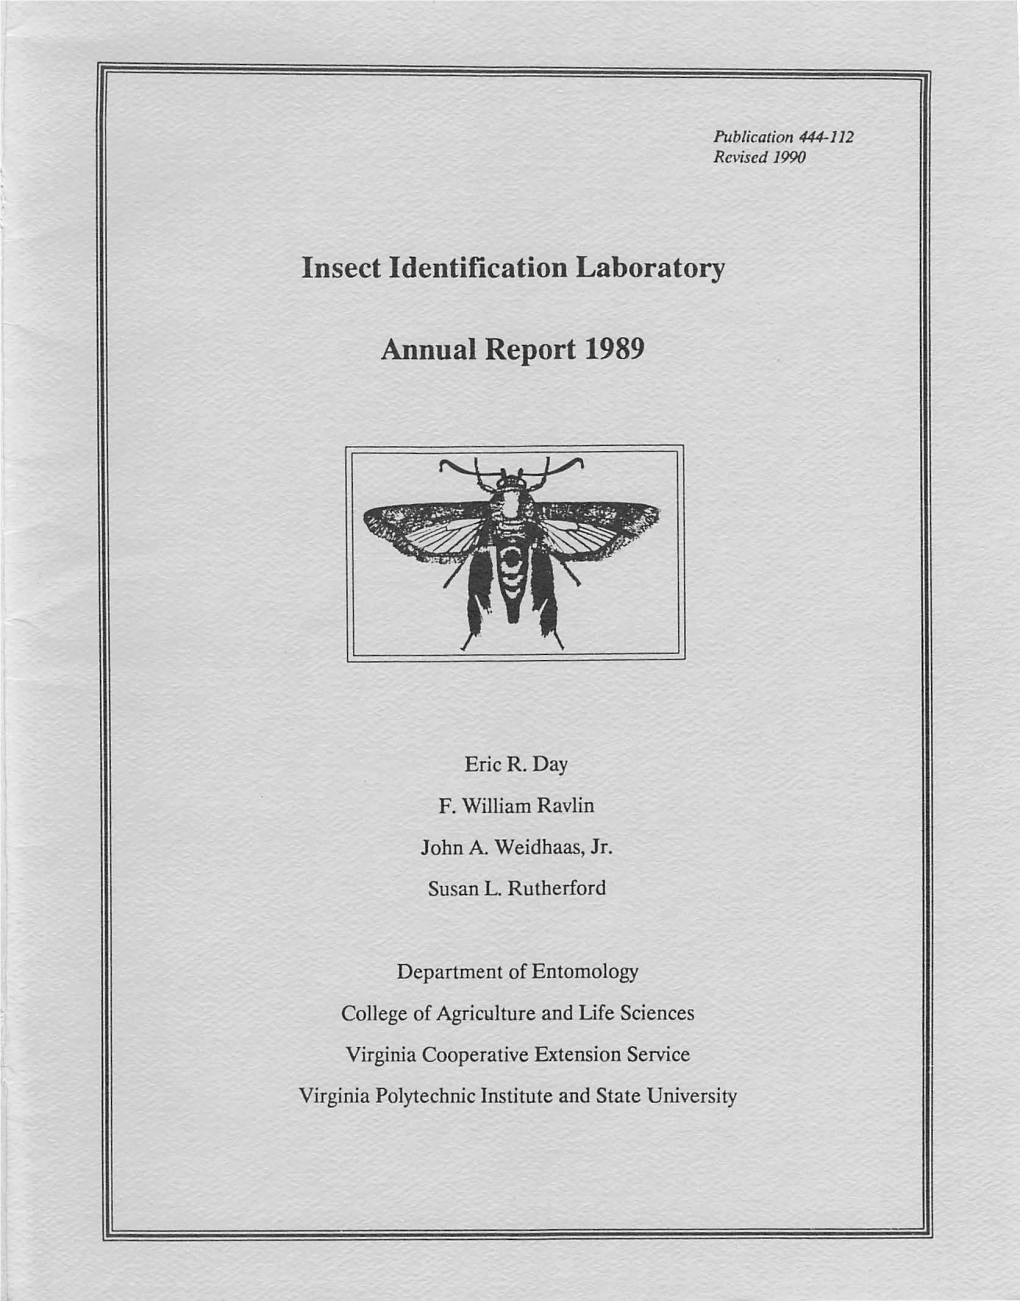 Insect Identification Laboratory Annual Report 1989